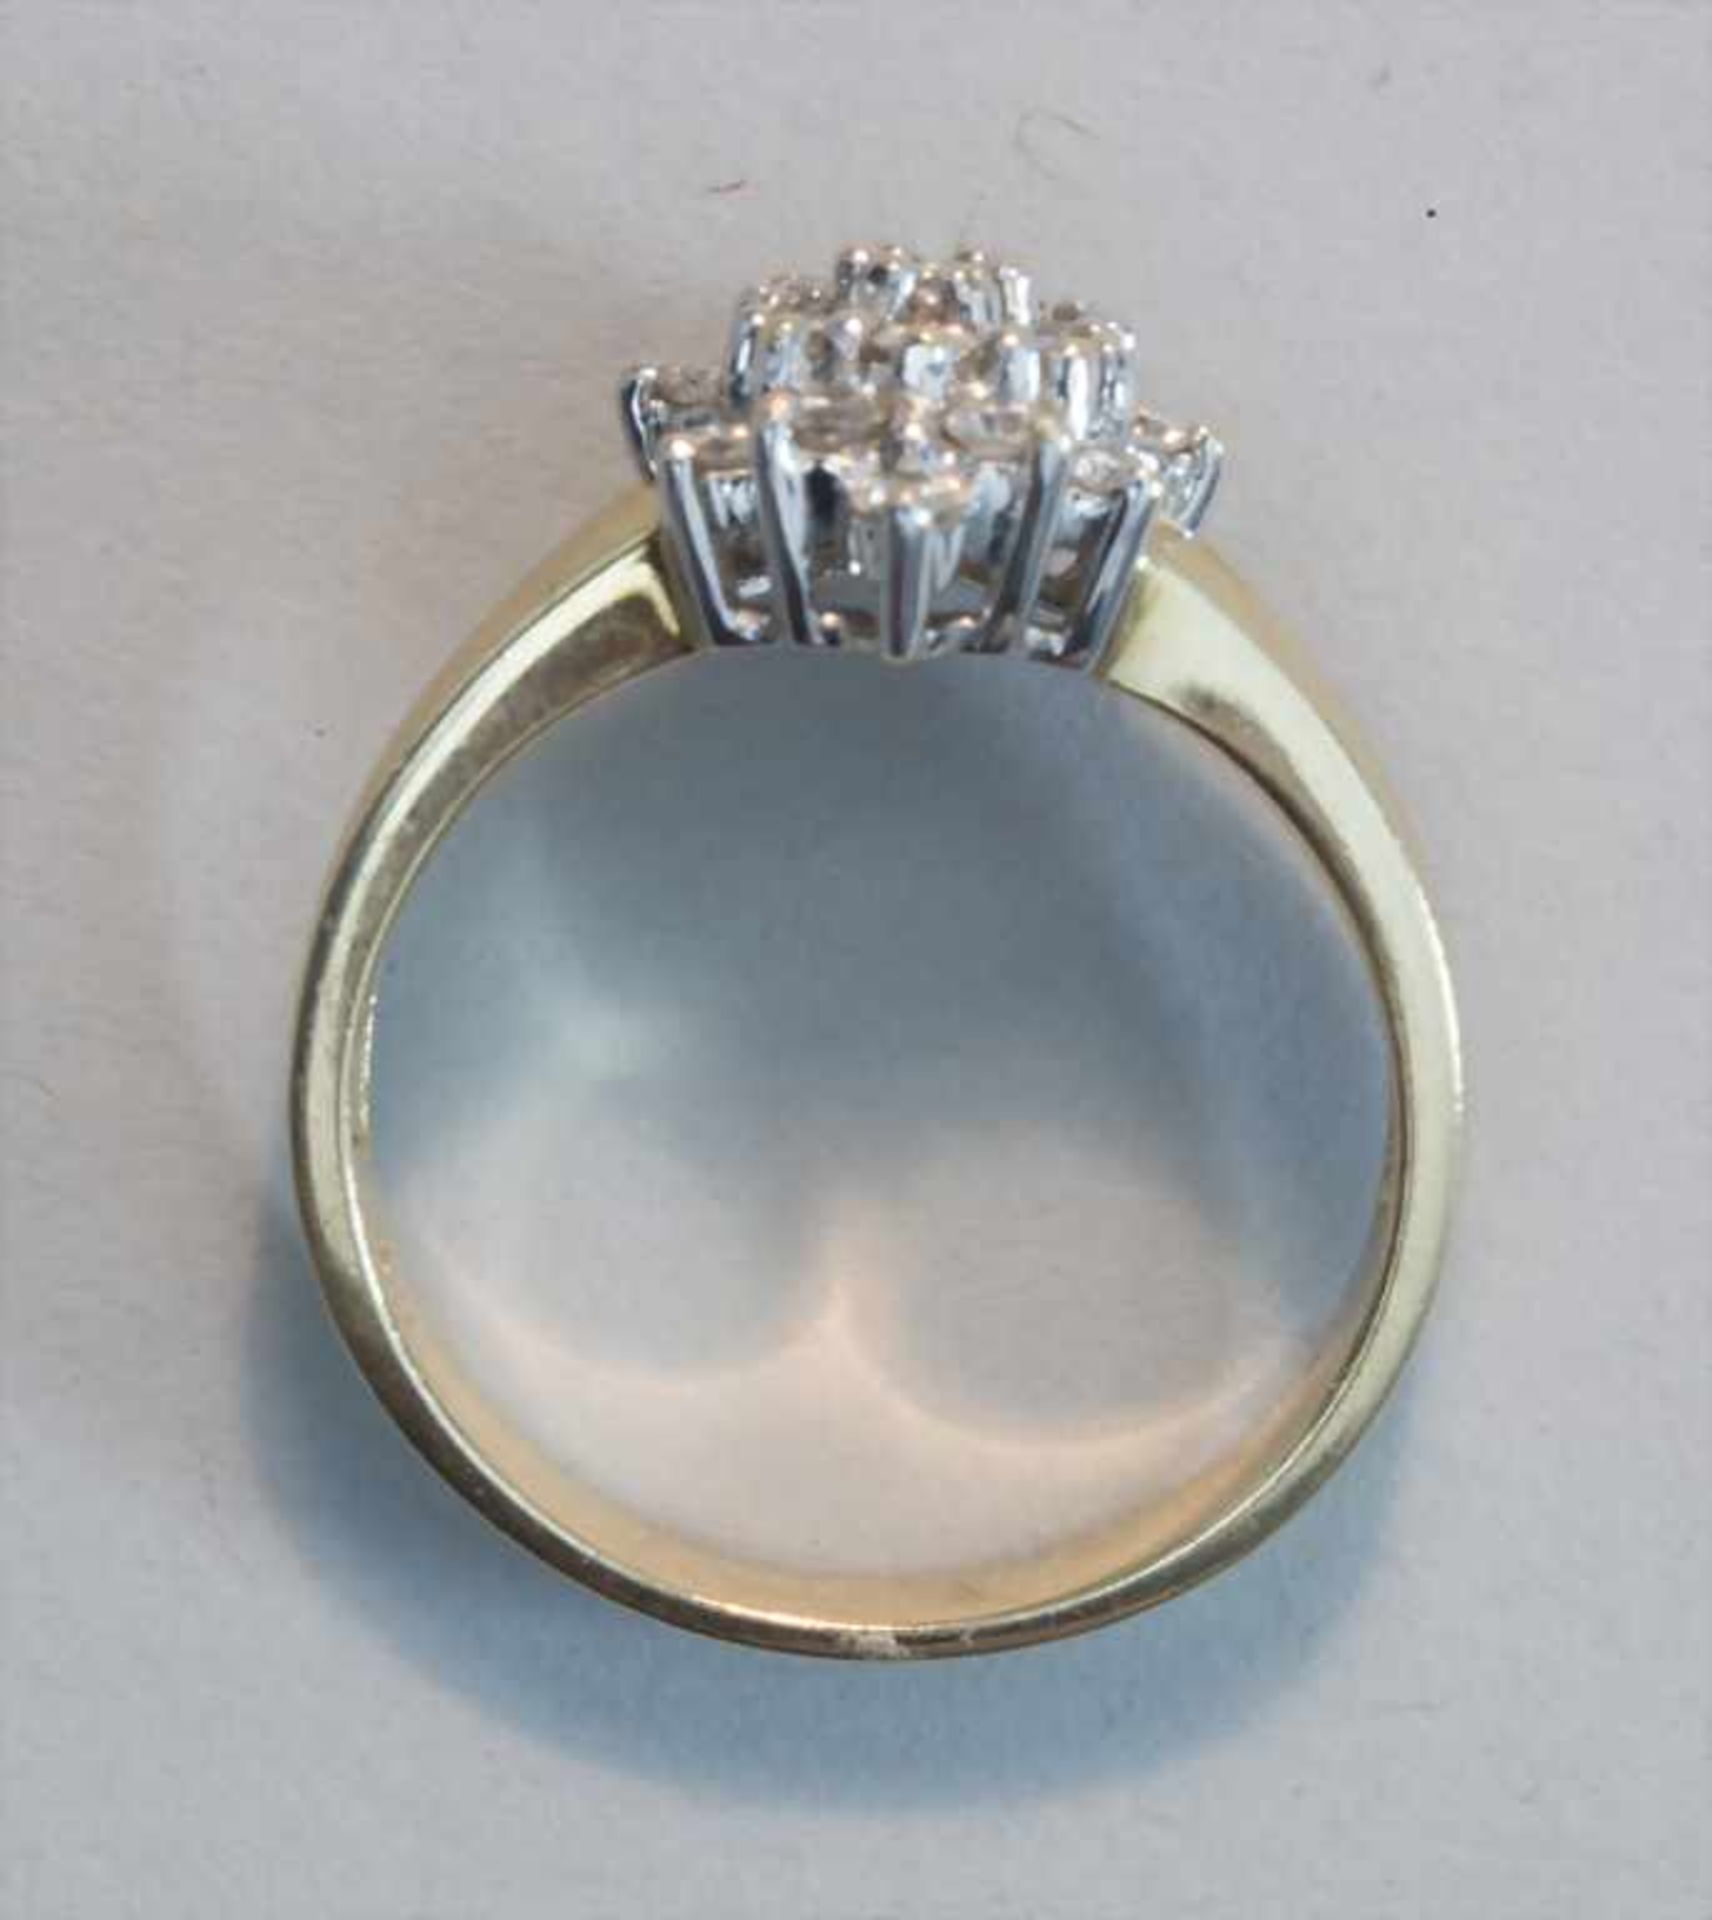 Damenring mit Diamant-Blüte / A ladies ring with a diamond blossom - Image 4 of 4